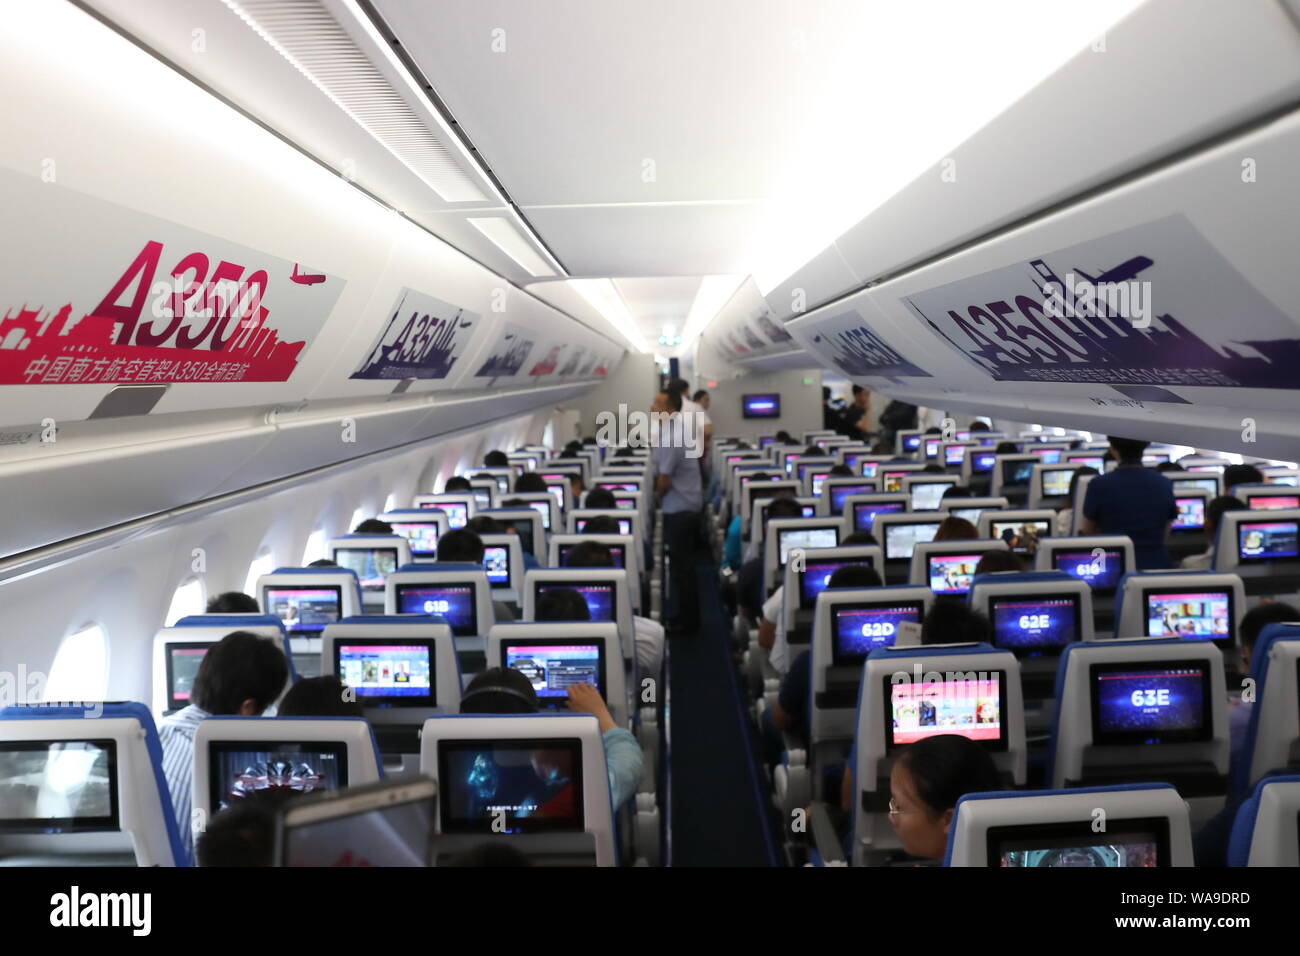 Interior View Of The Economy Class For The First Airbus A350